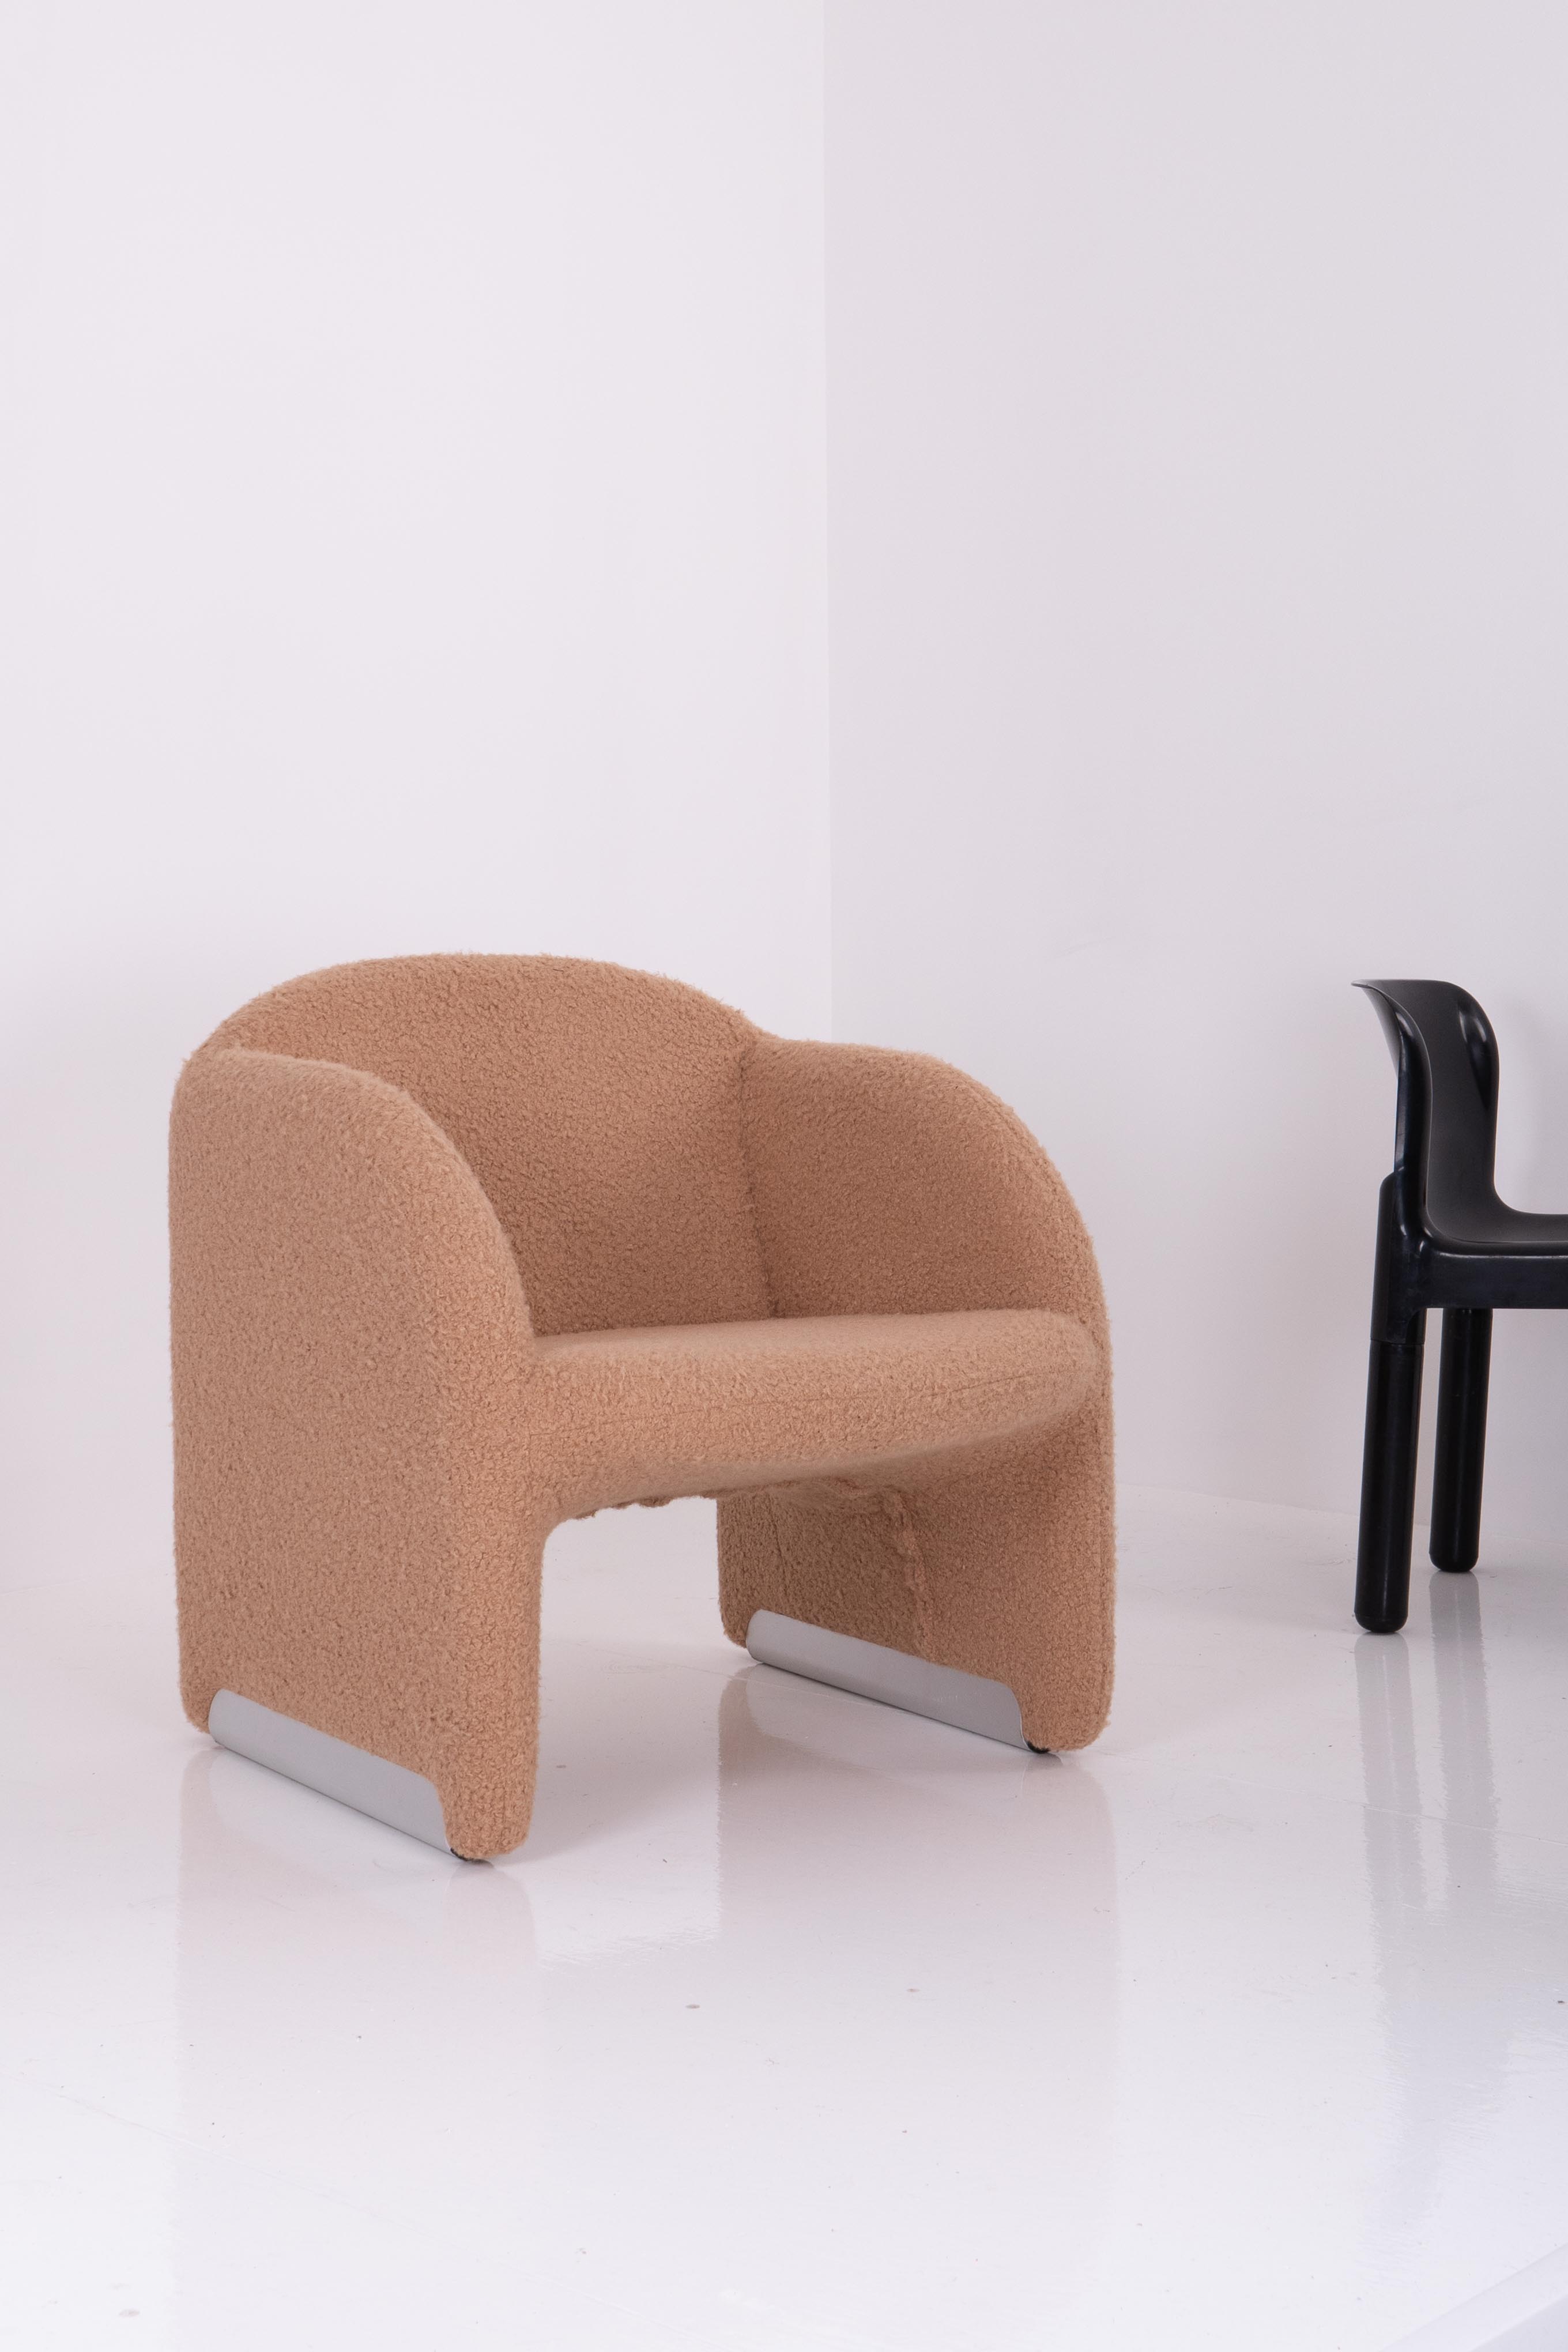 'Ben' Chair by Pierre Paulin for Artifort For Sale